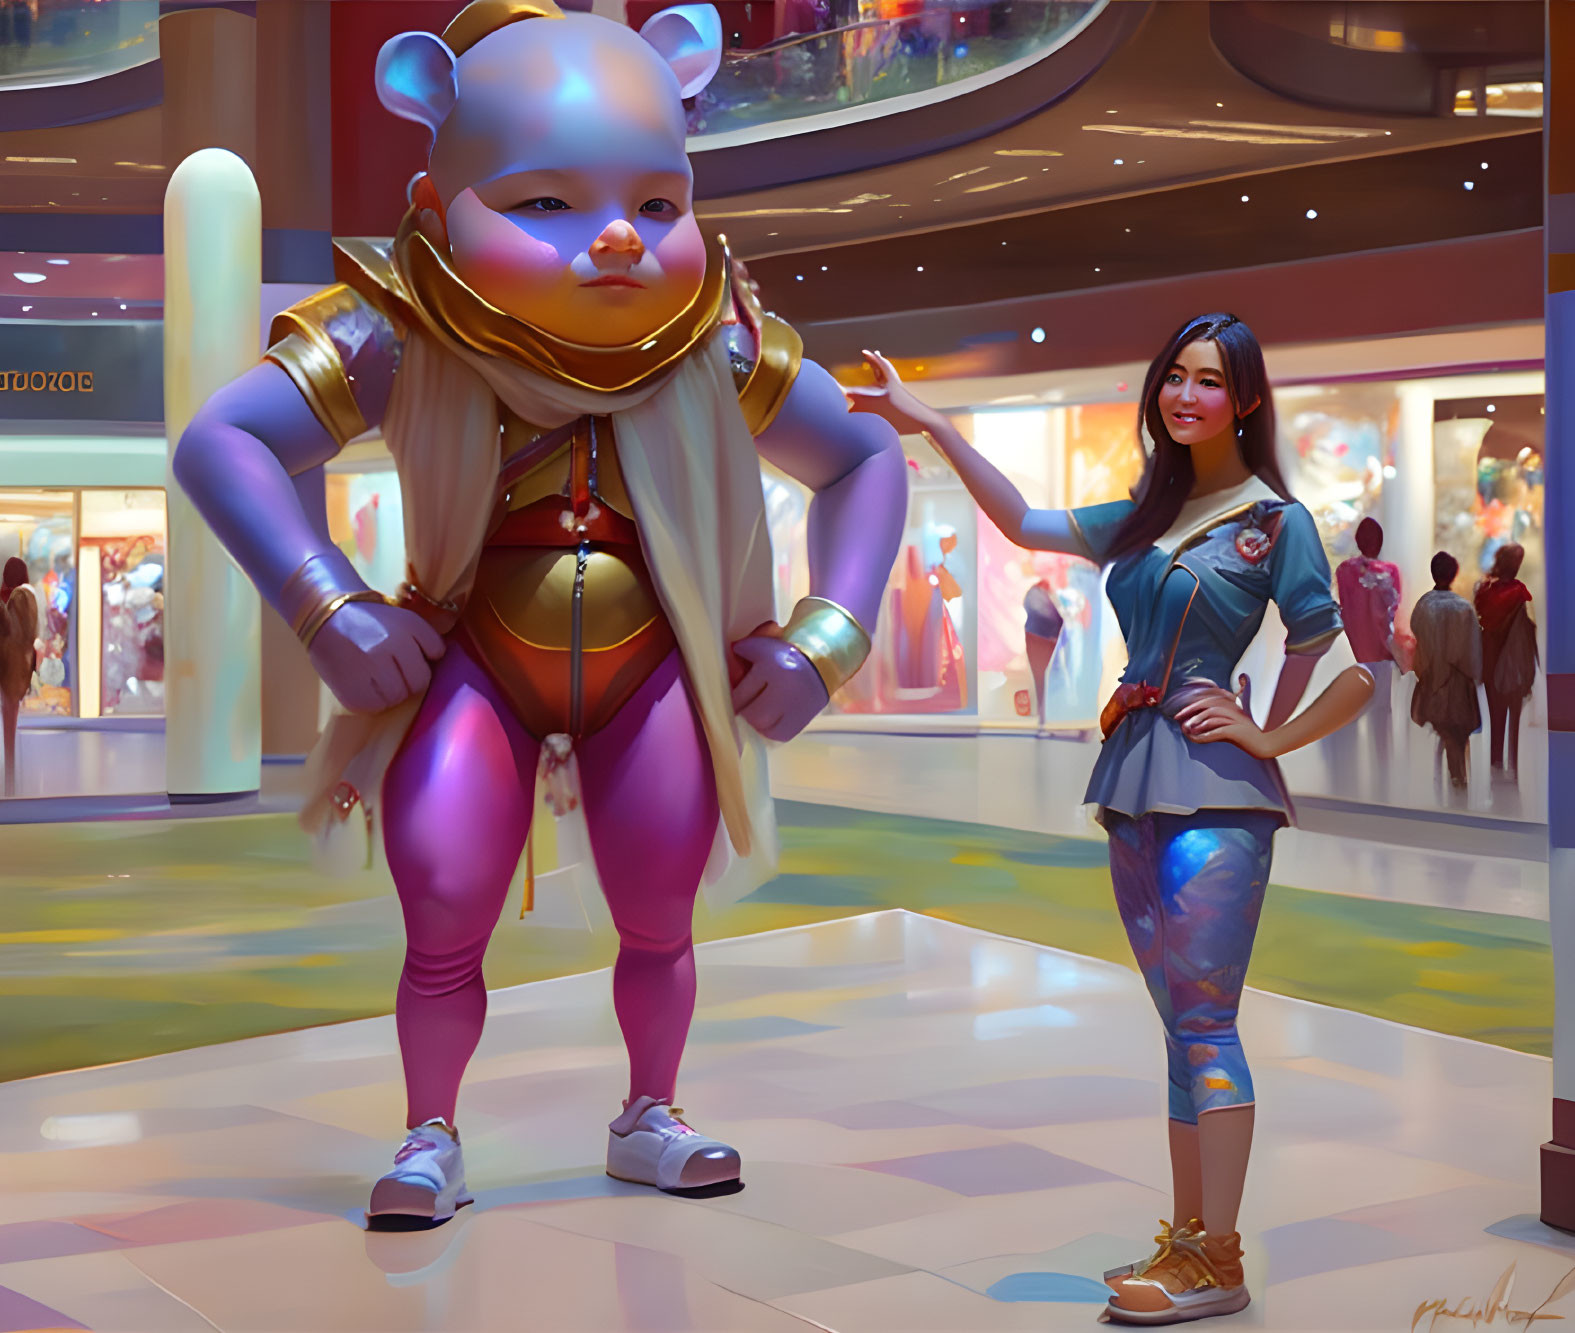 Woman posing with futuristic cat character in vibrant mall